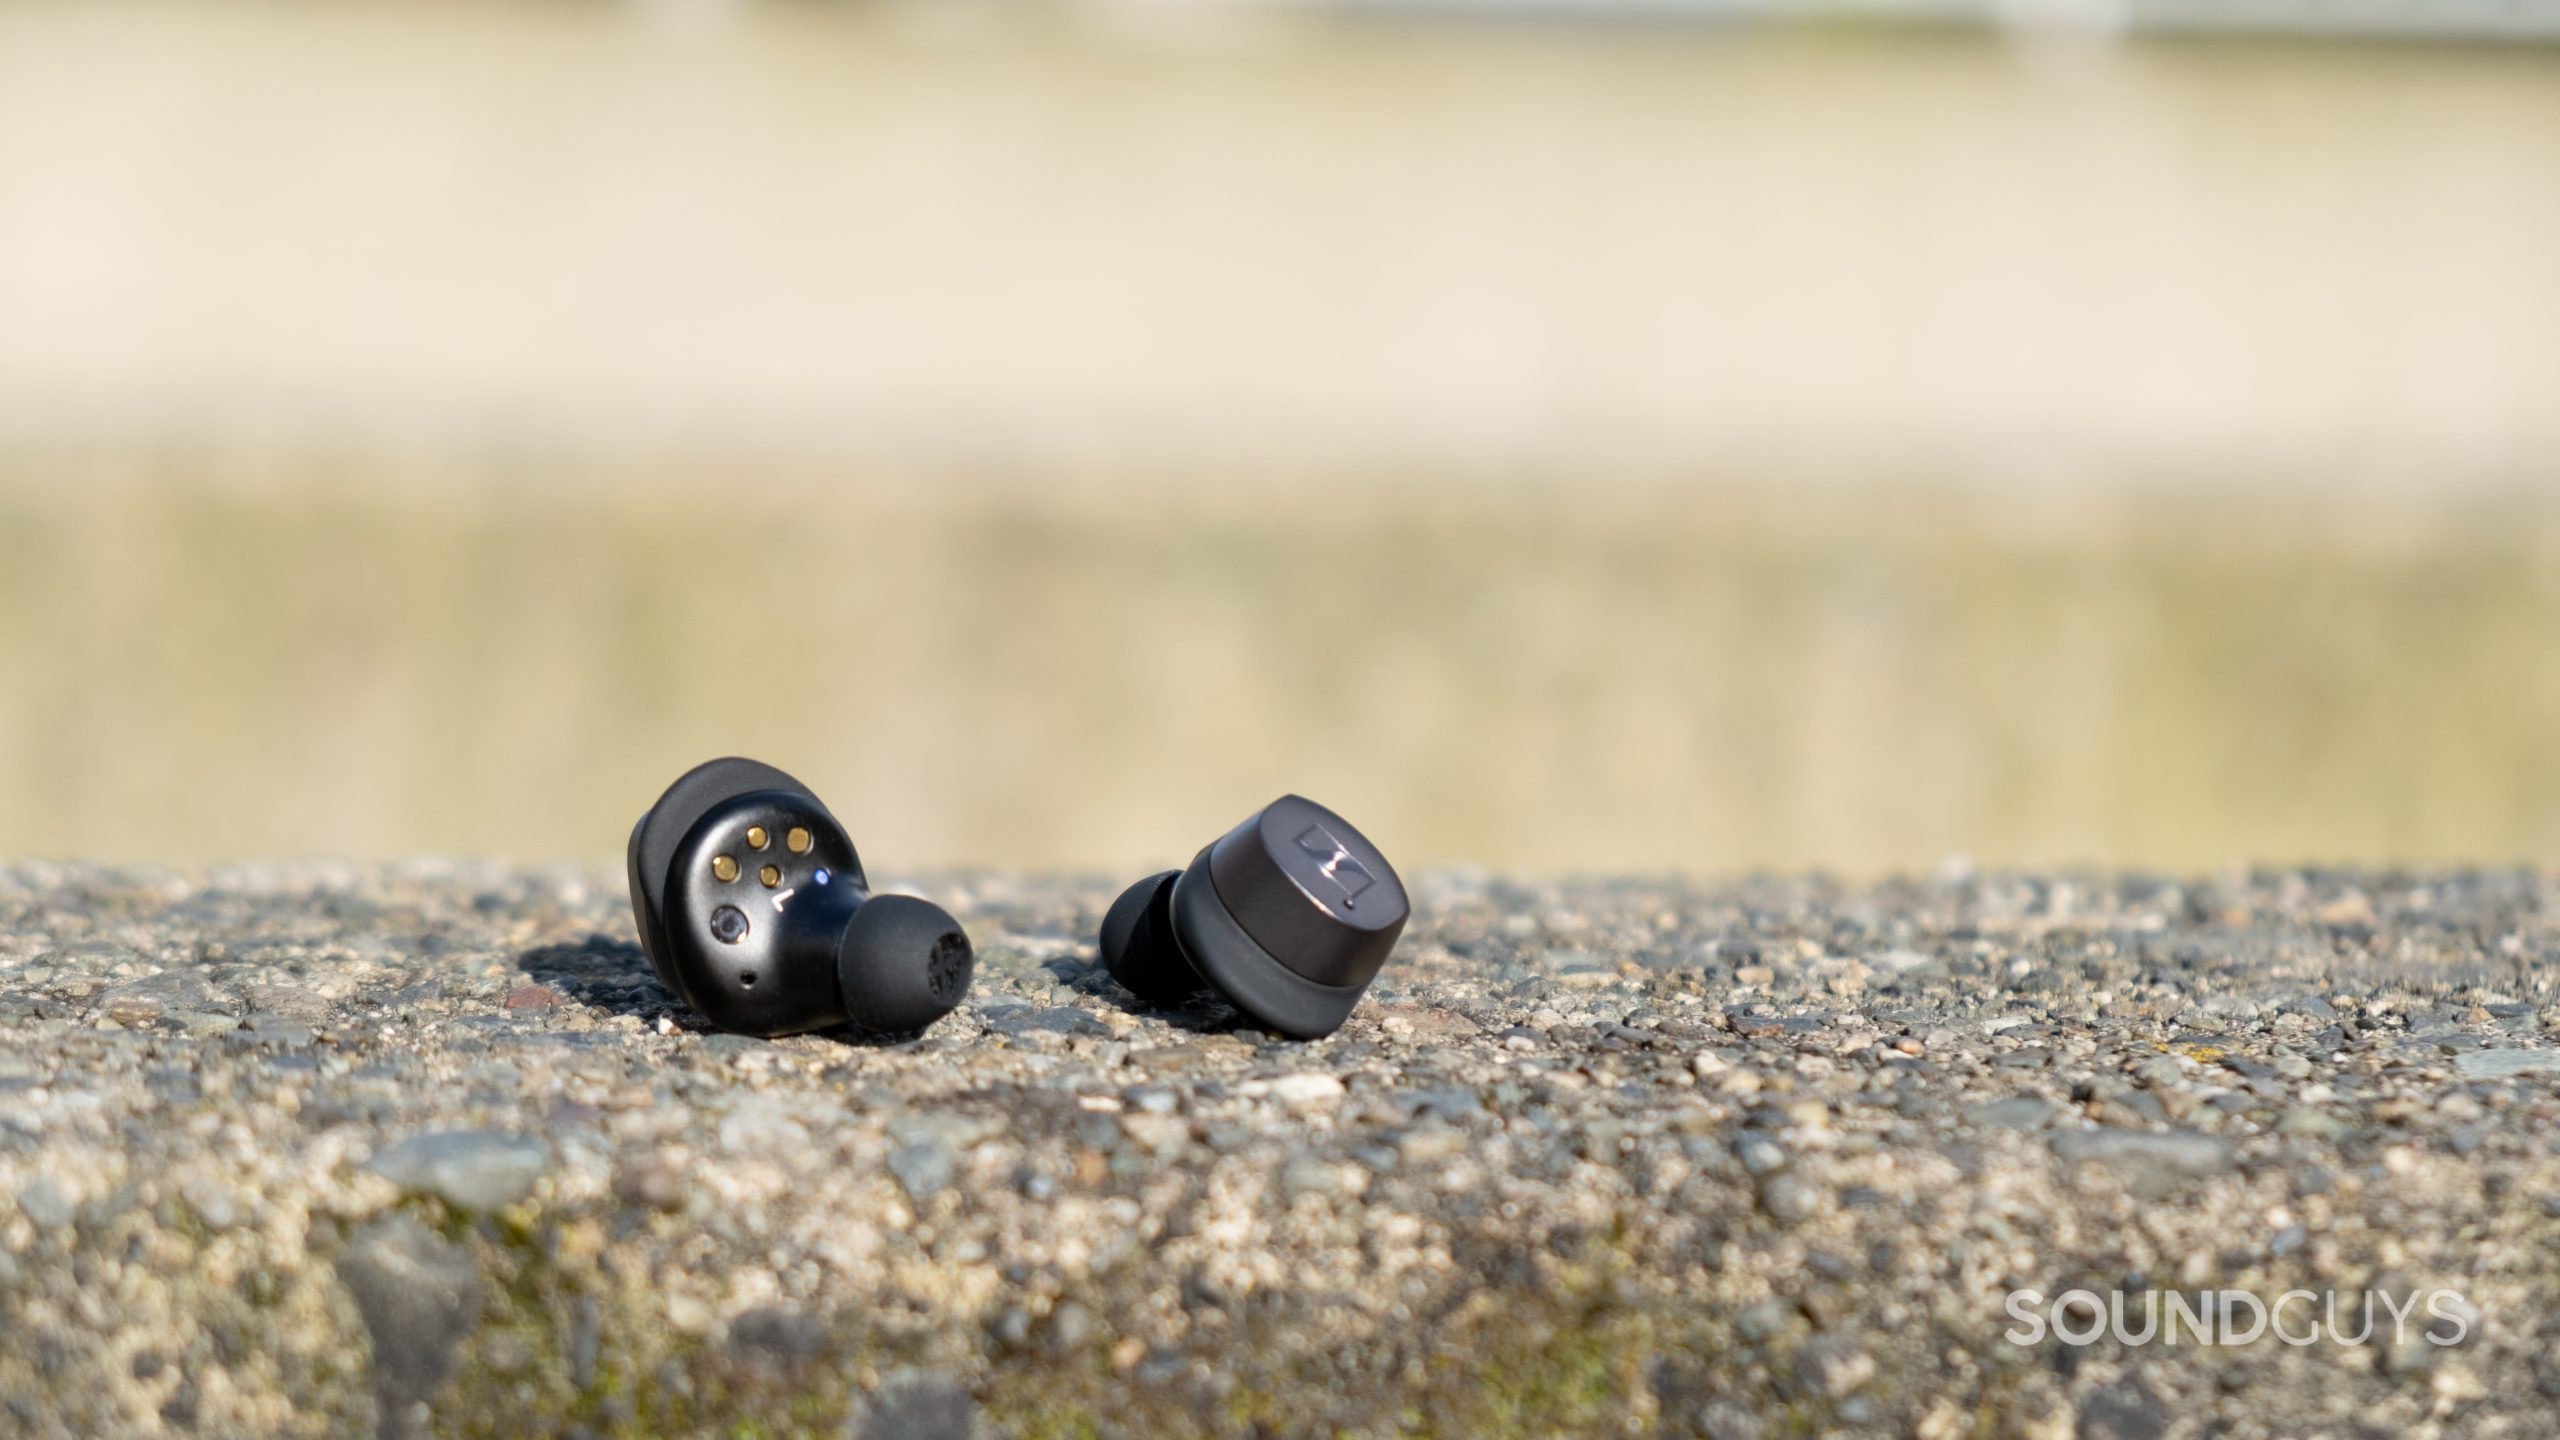 The Sennheiser MOMENTUM True Wireless 3 earbuds rest on rough concrete, showing the inside and outer housings.